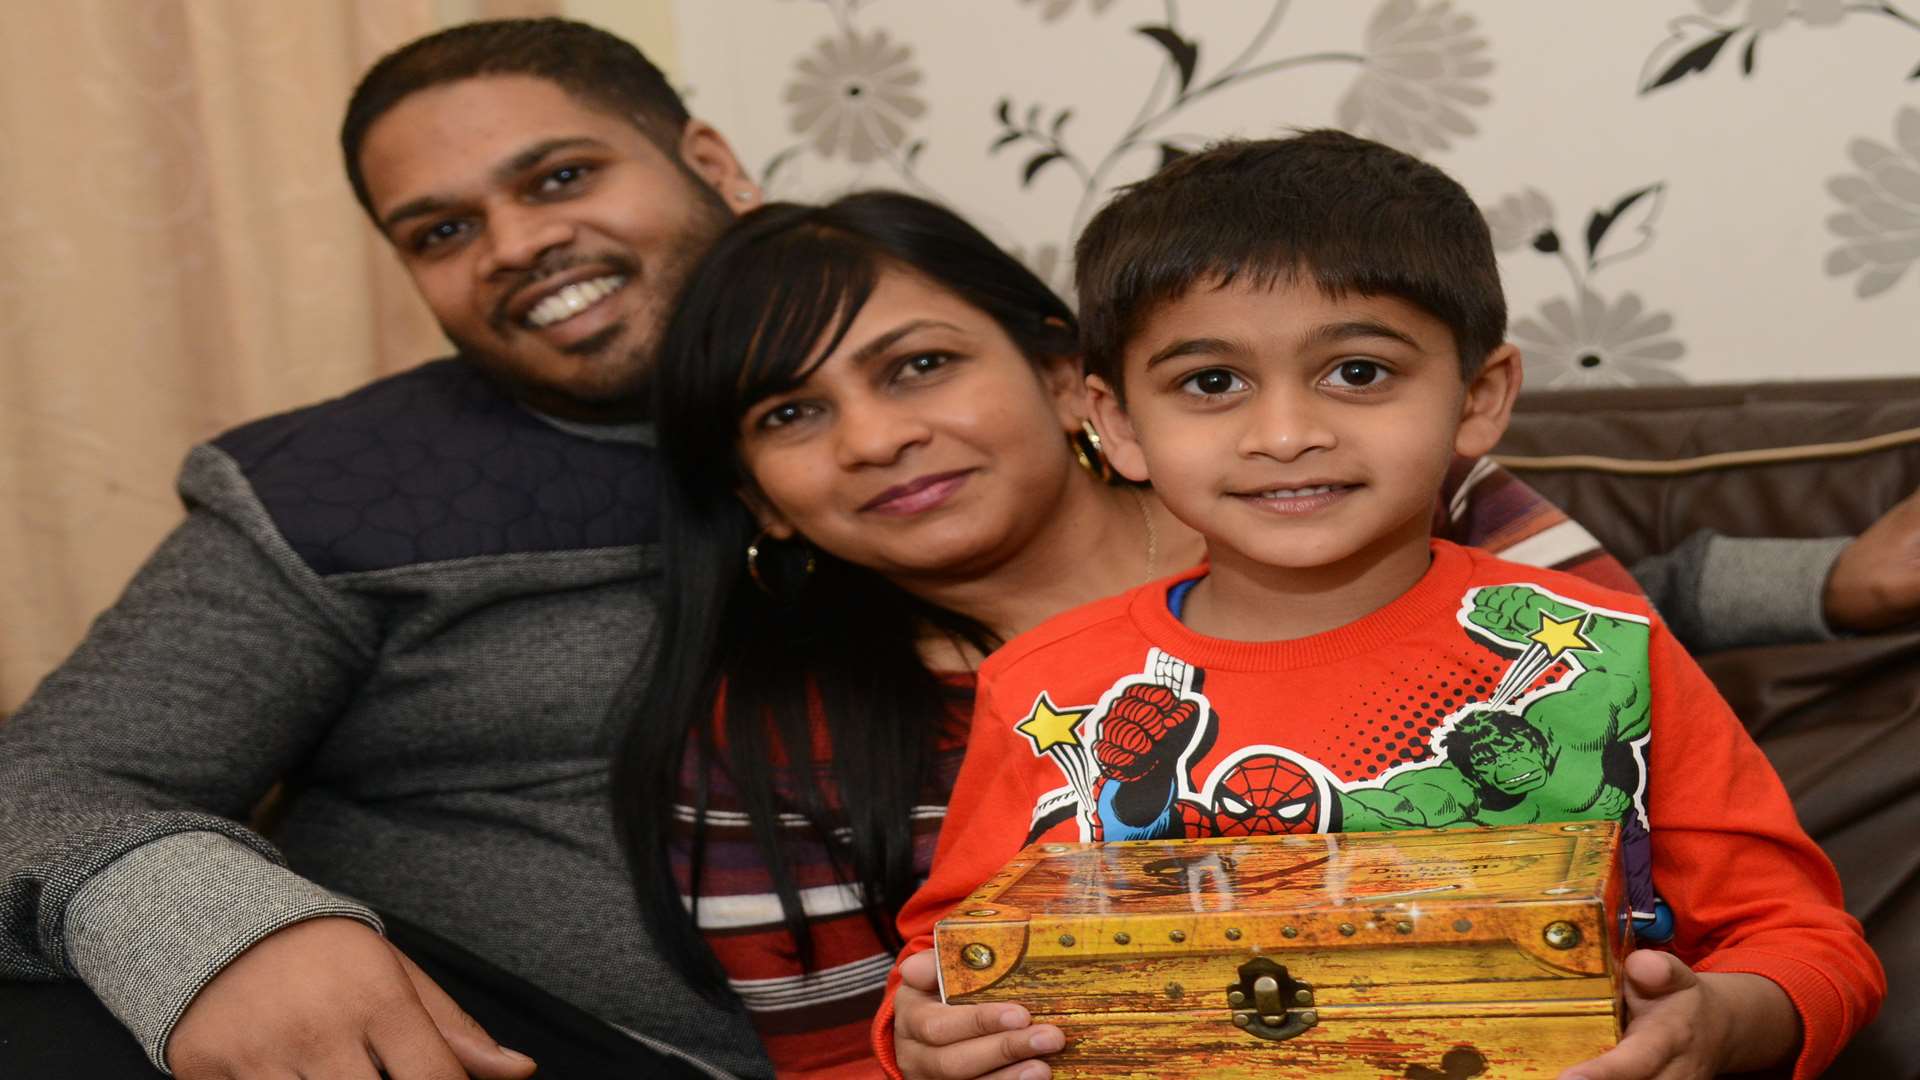 Presley Babway, five, with parents Sunita and Ricky